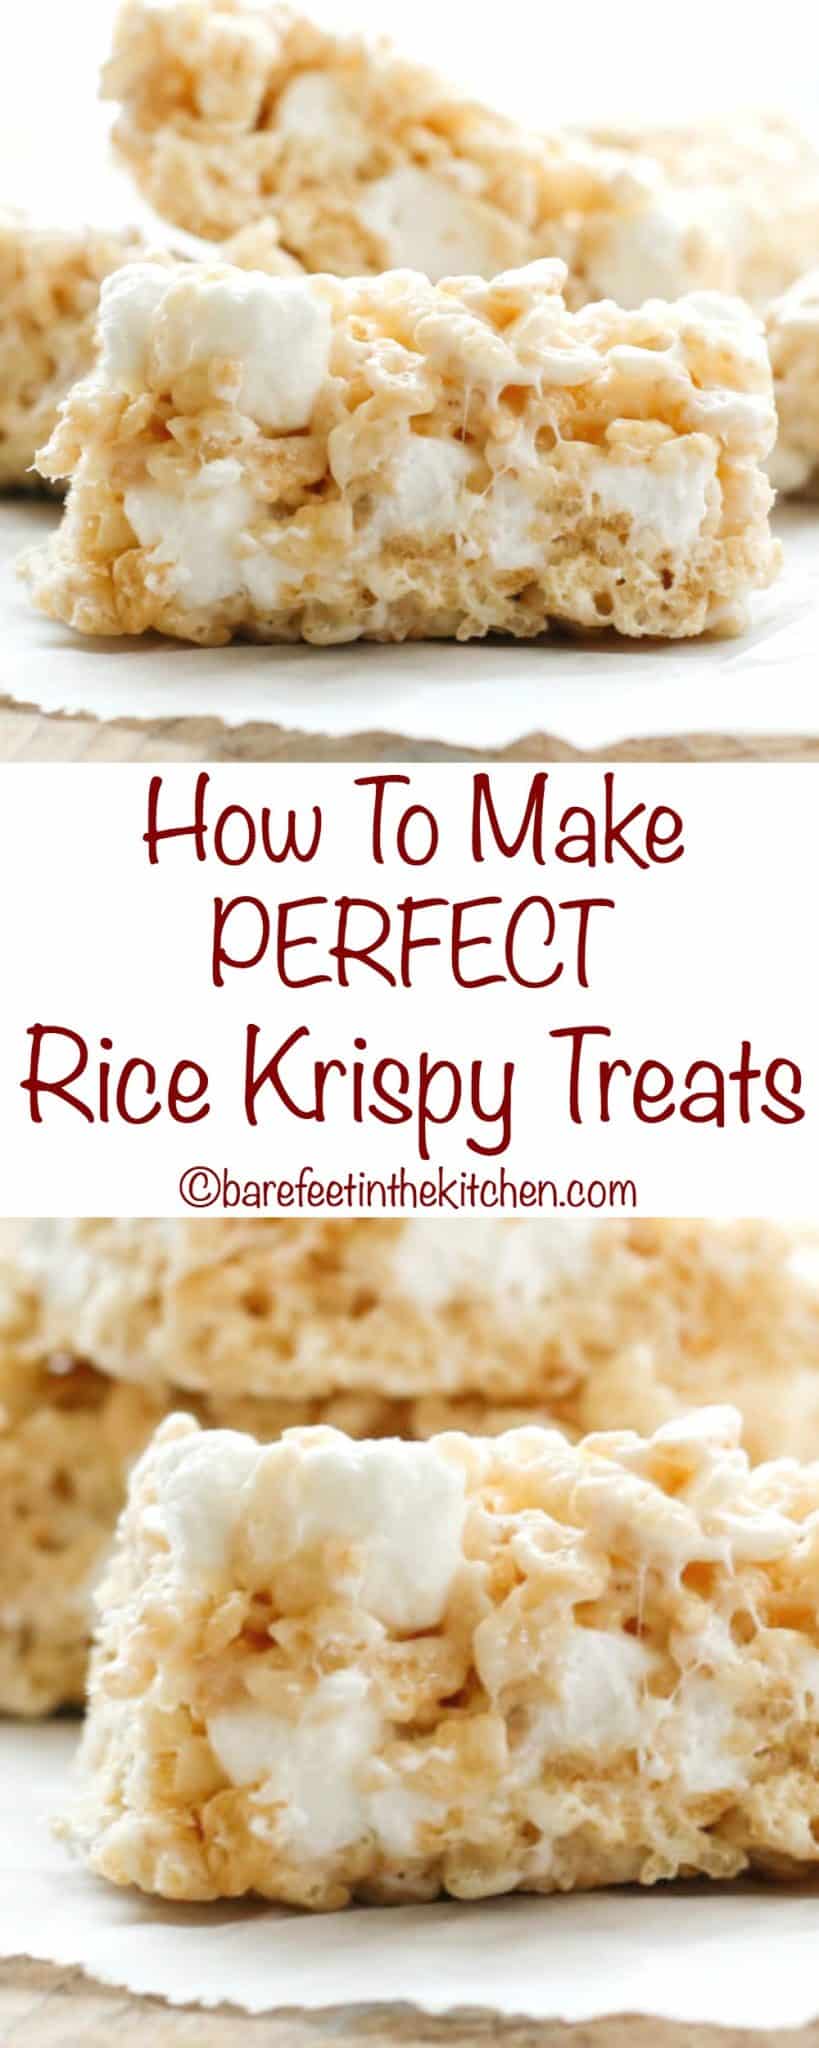 How to make the perfect rice crispy treat - recipe available at barefeetinthekitchen.com